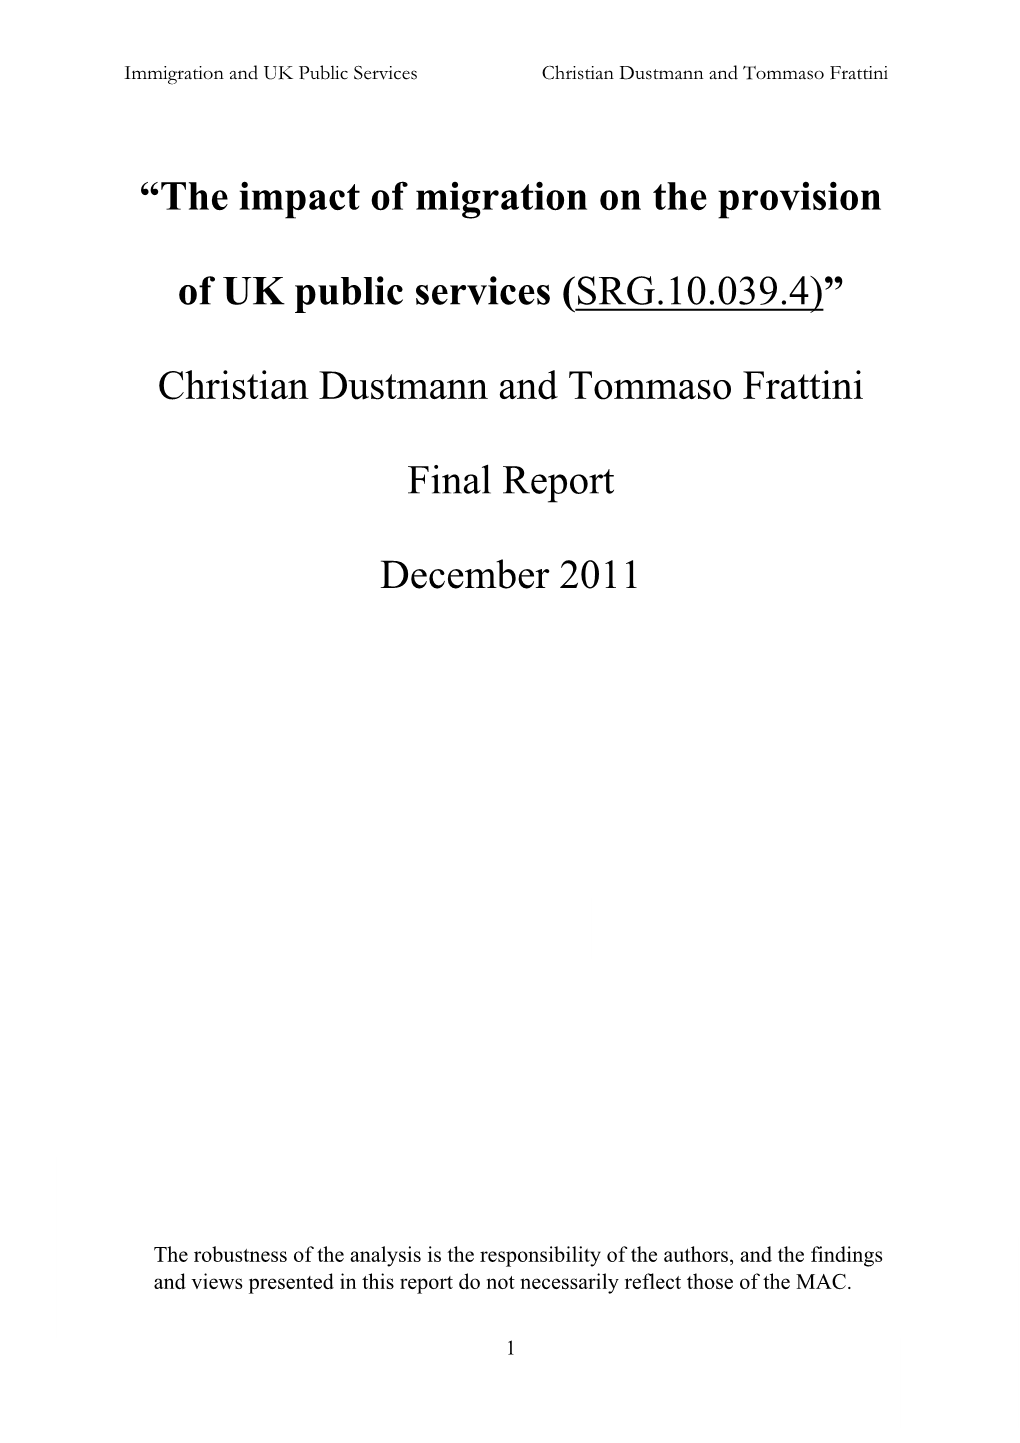 The Impact of Migration on the Provision of UK Public Services”